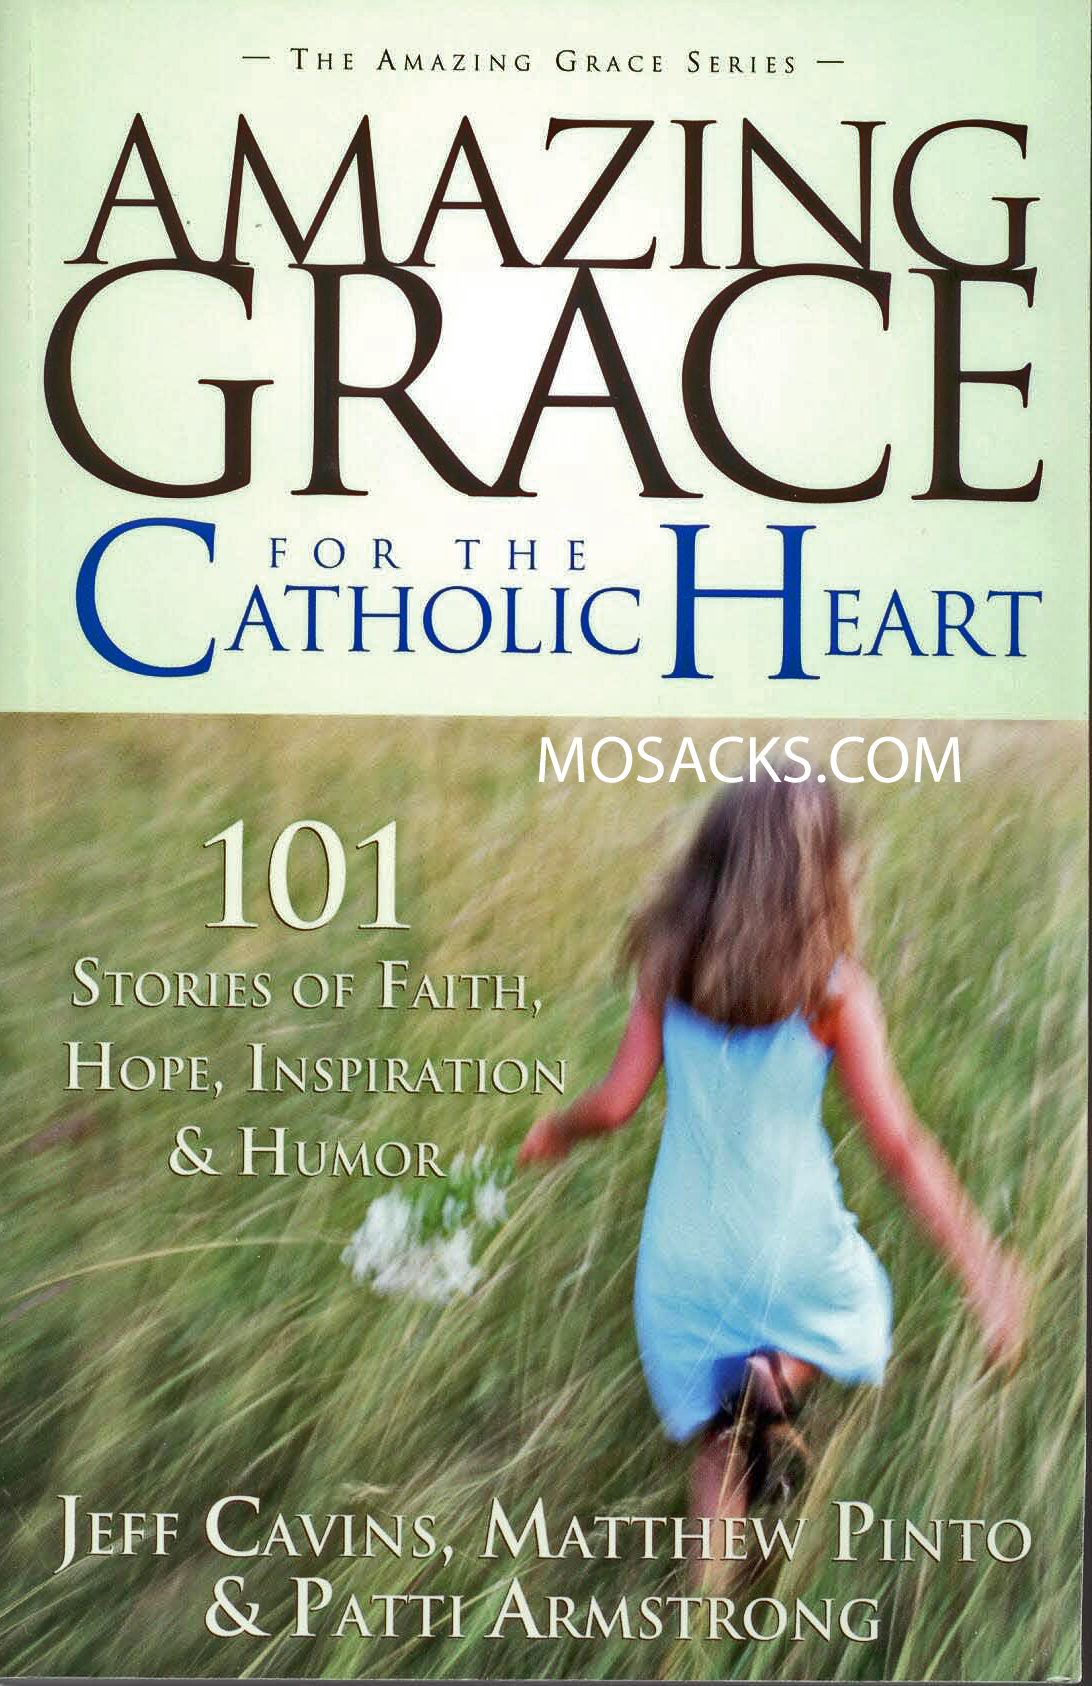 Amazing Grace For The Catholic Heart by Jeff Cavins, Matthew Pinto & Patti Armstrong